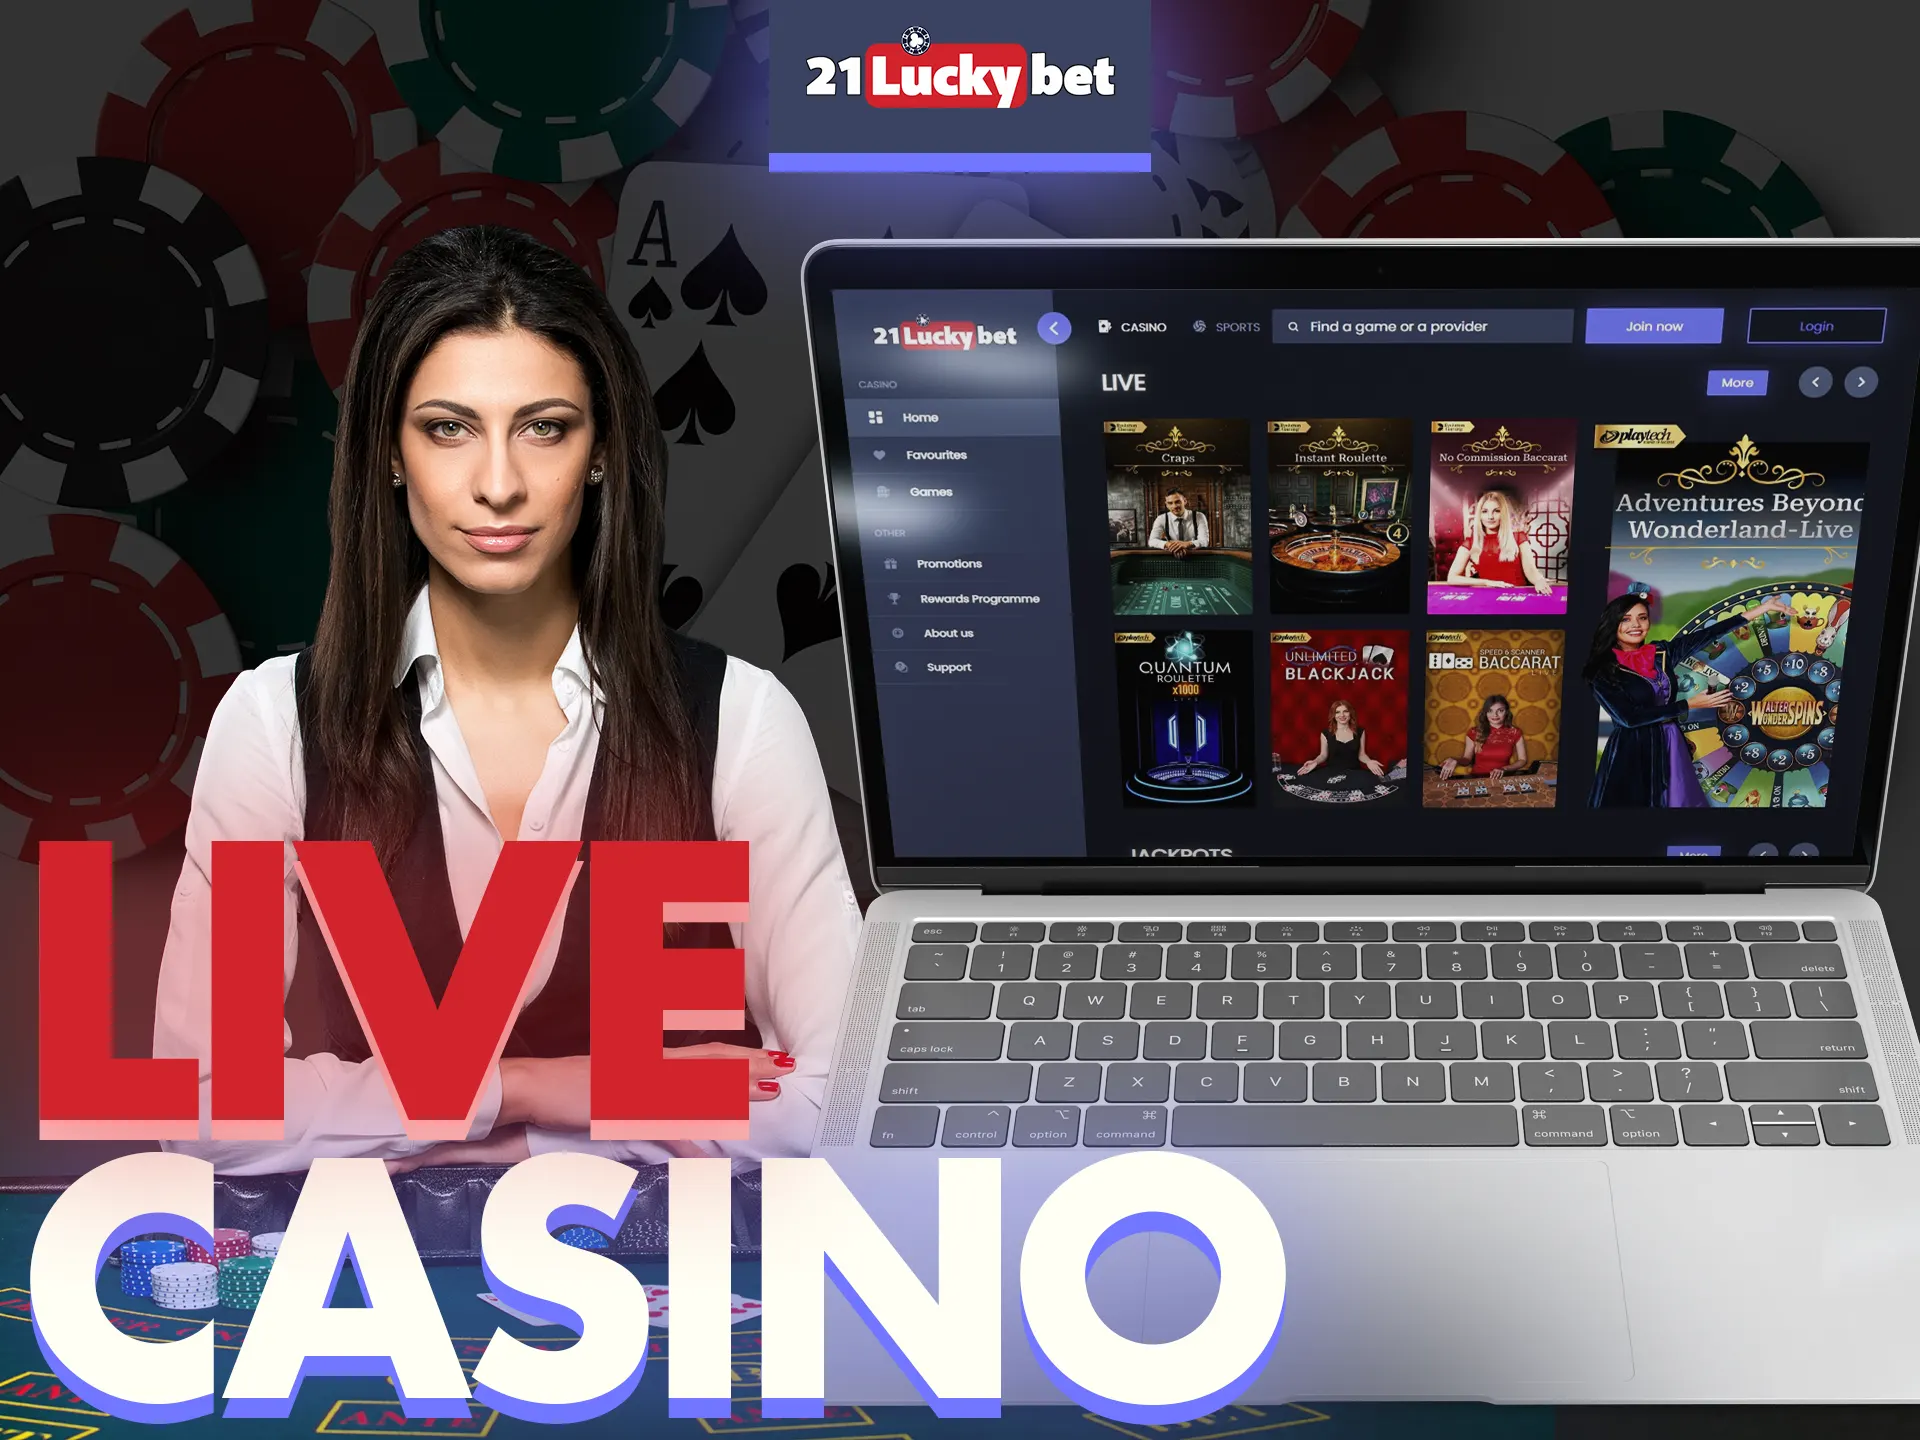 Play with real dealers at 21luckybet Live Casino.